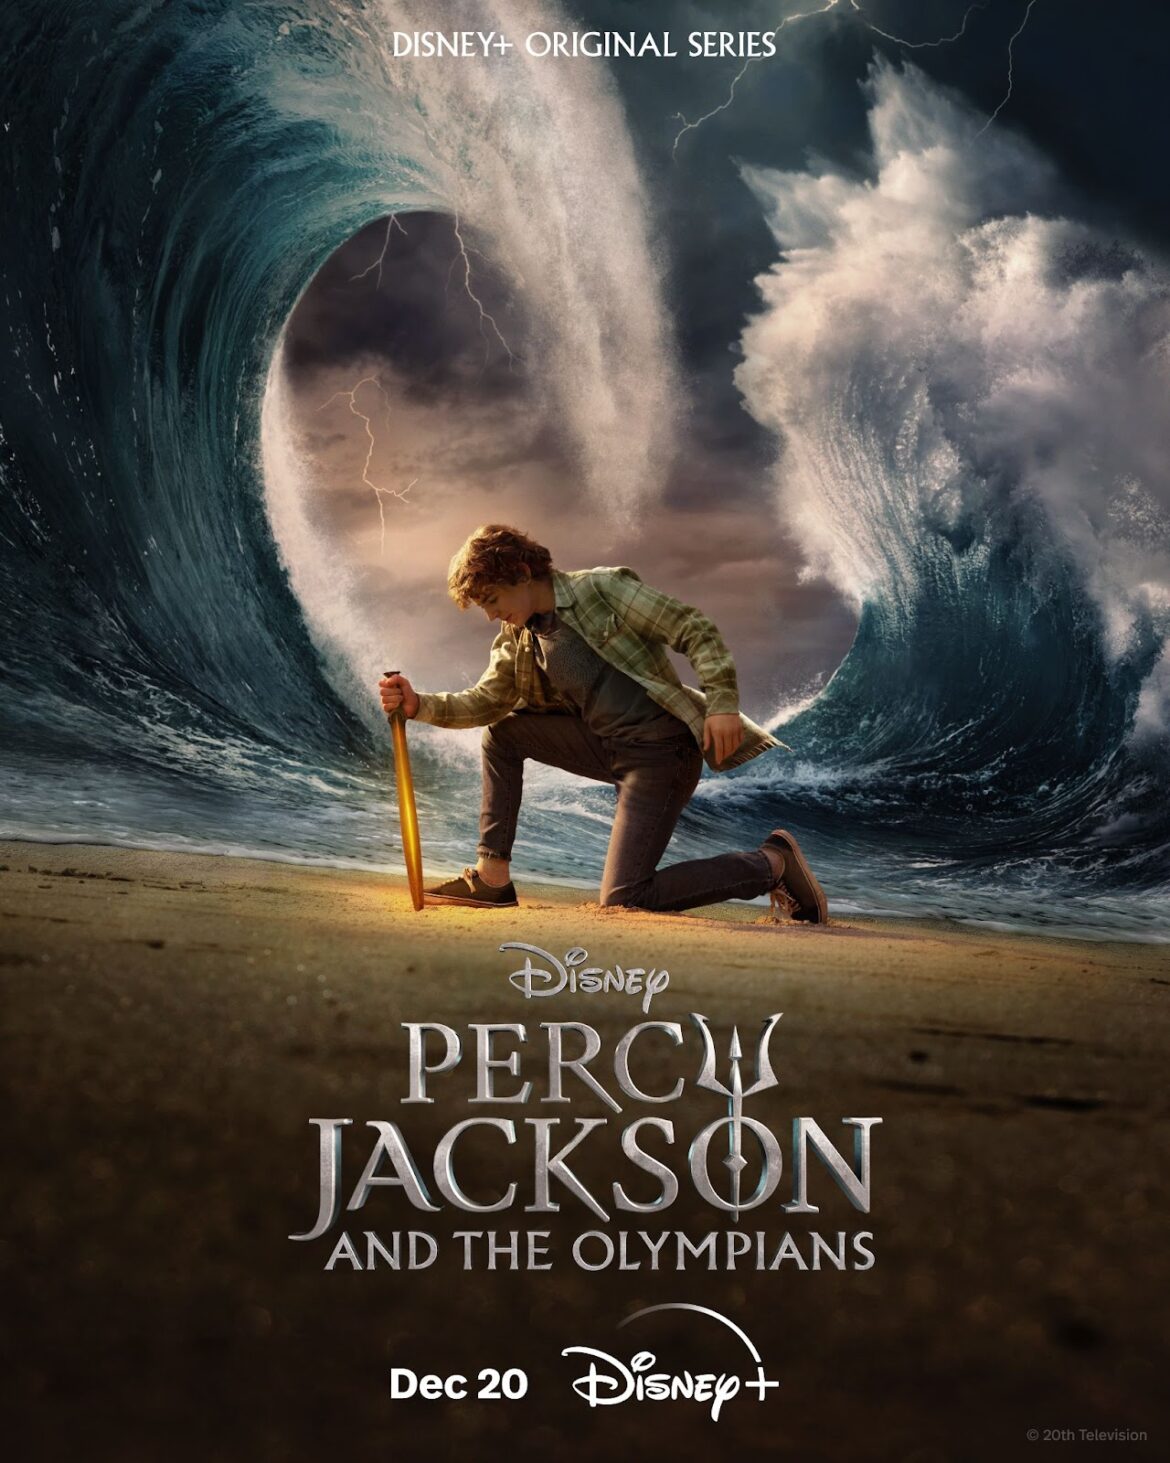 New Trailer Revealed for Disney+ Original Series Percy Jackson and the Olympians